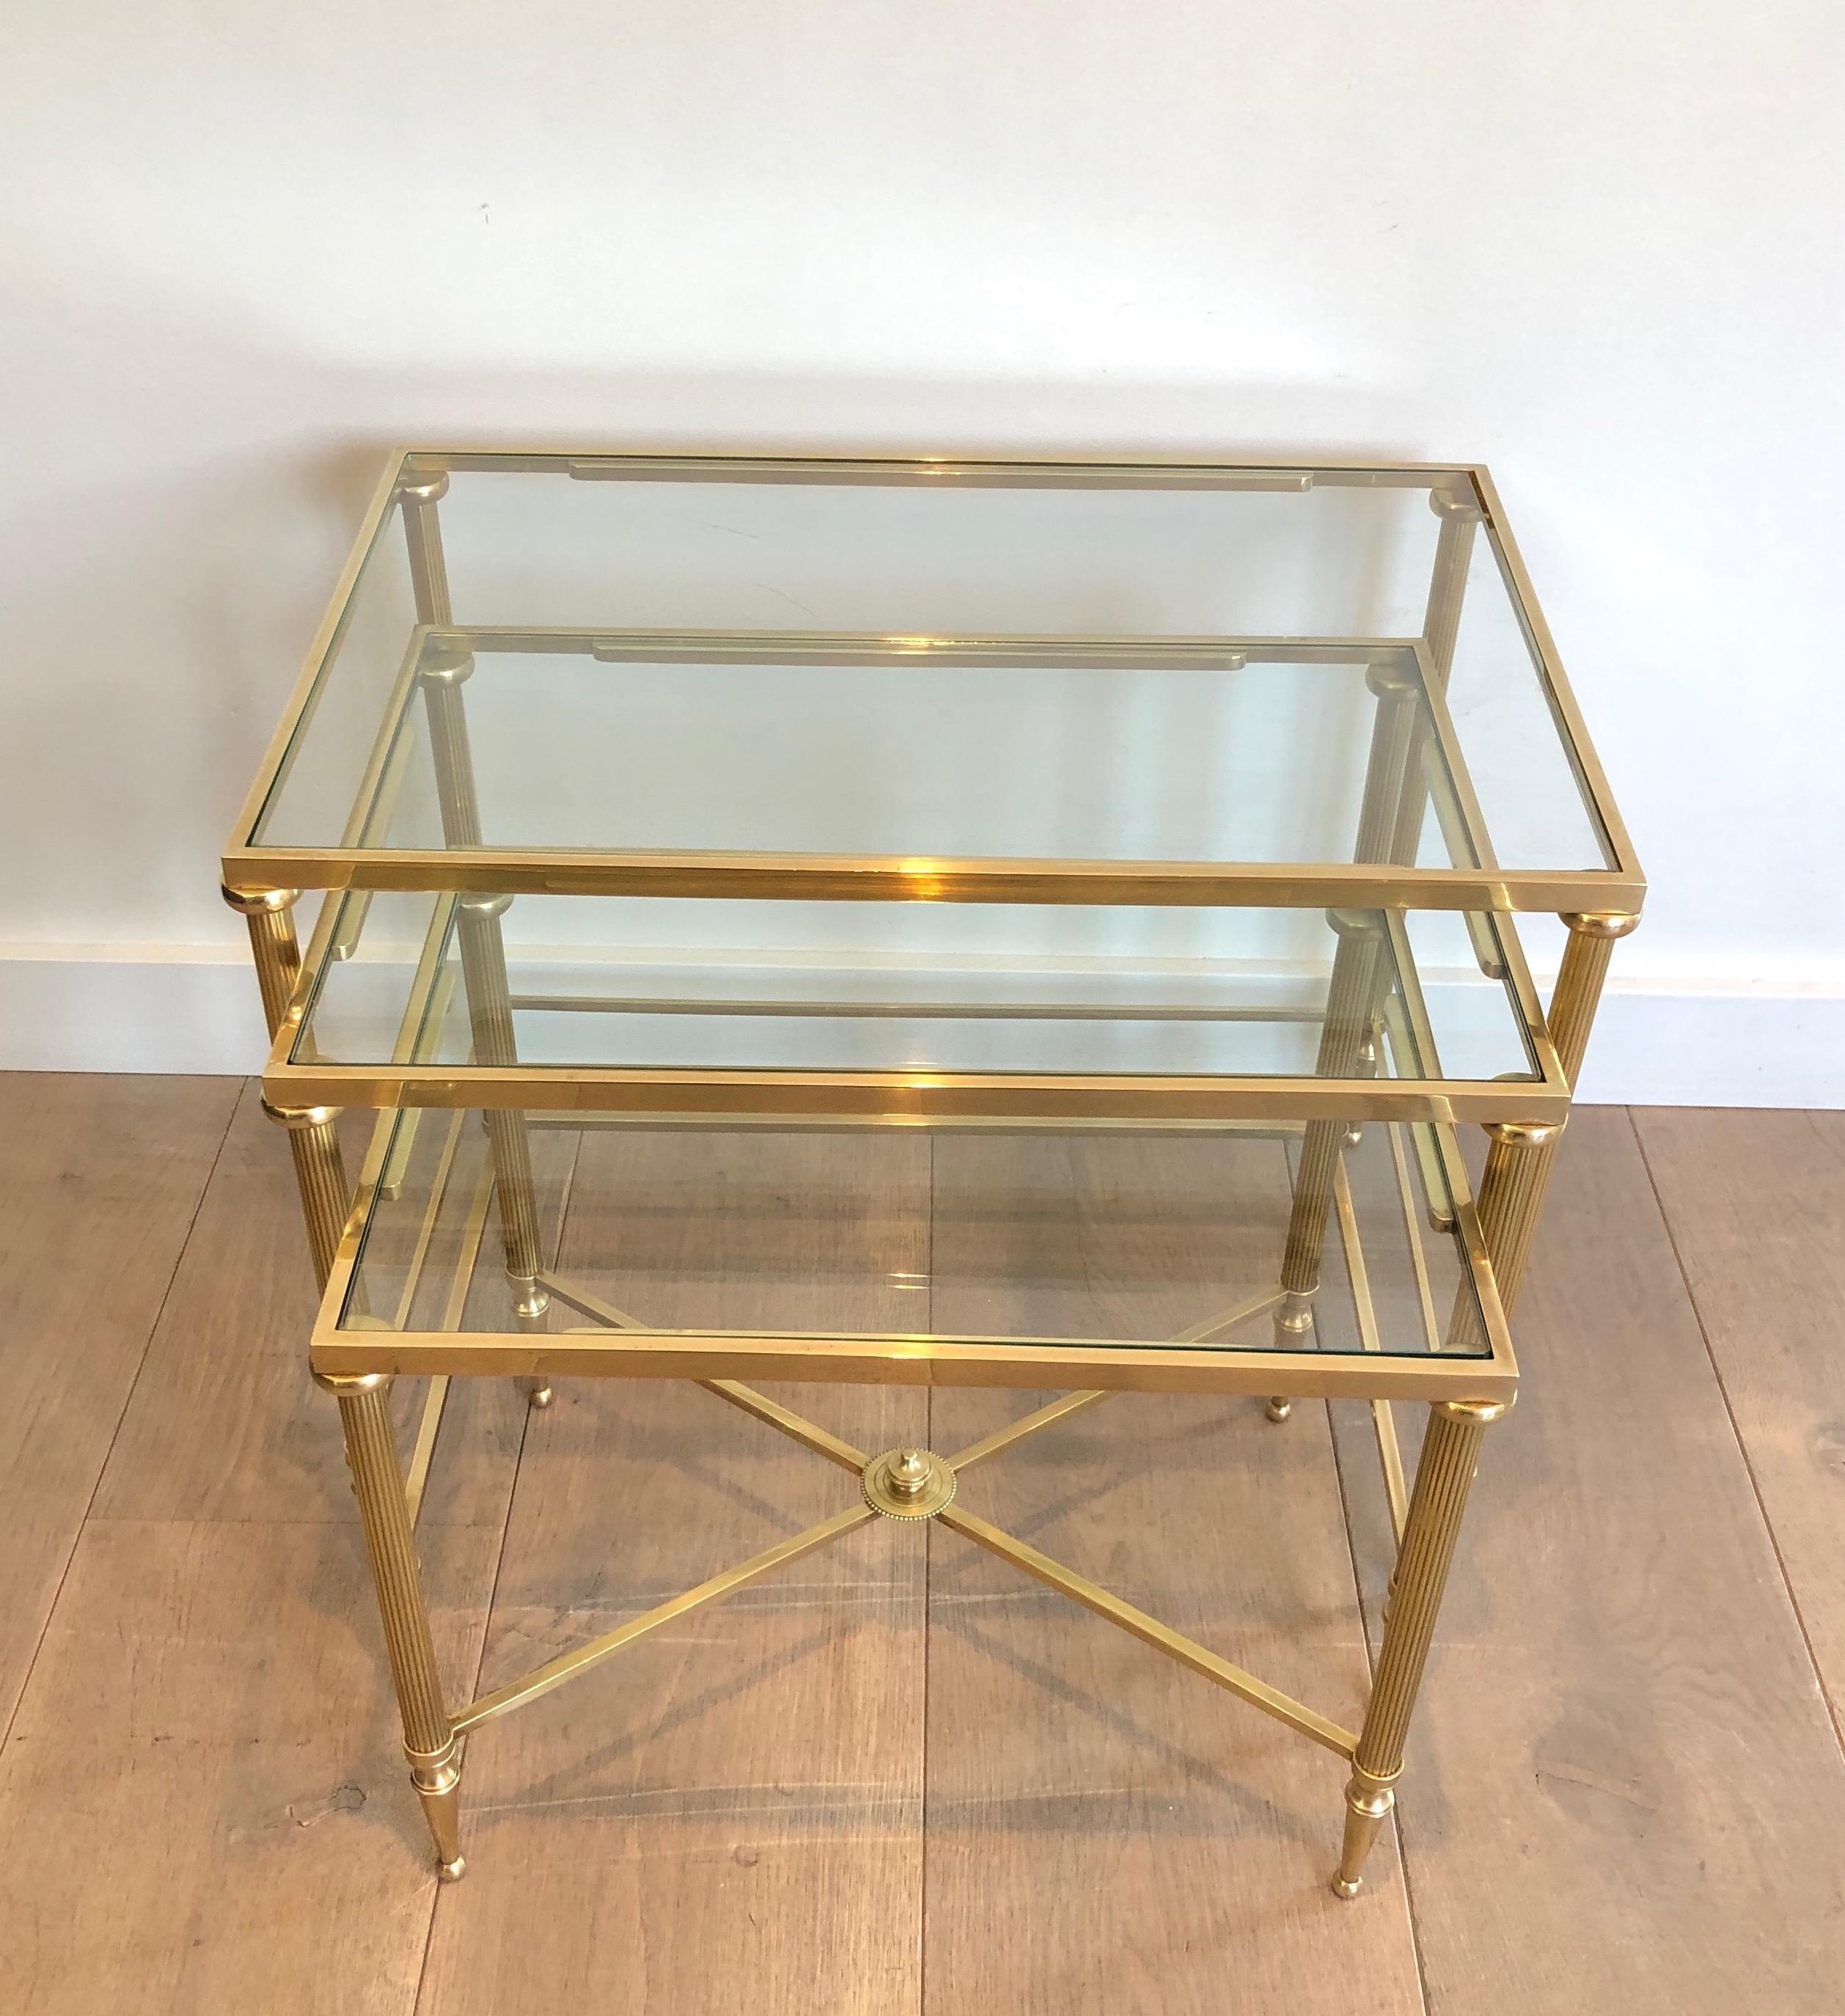 Neoclassical Maison Jansen, Set of 3 Brass and Glass Nesting Tables, French, Circa 1940